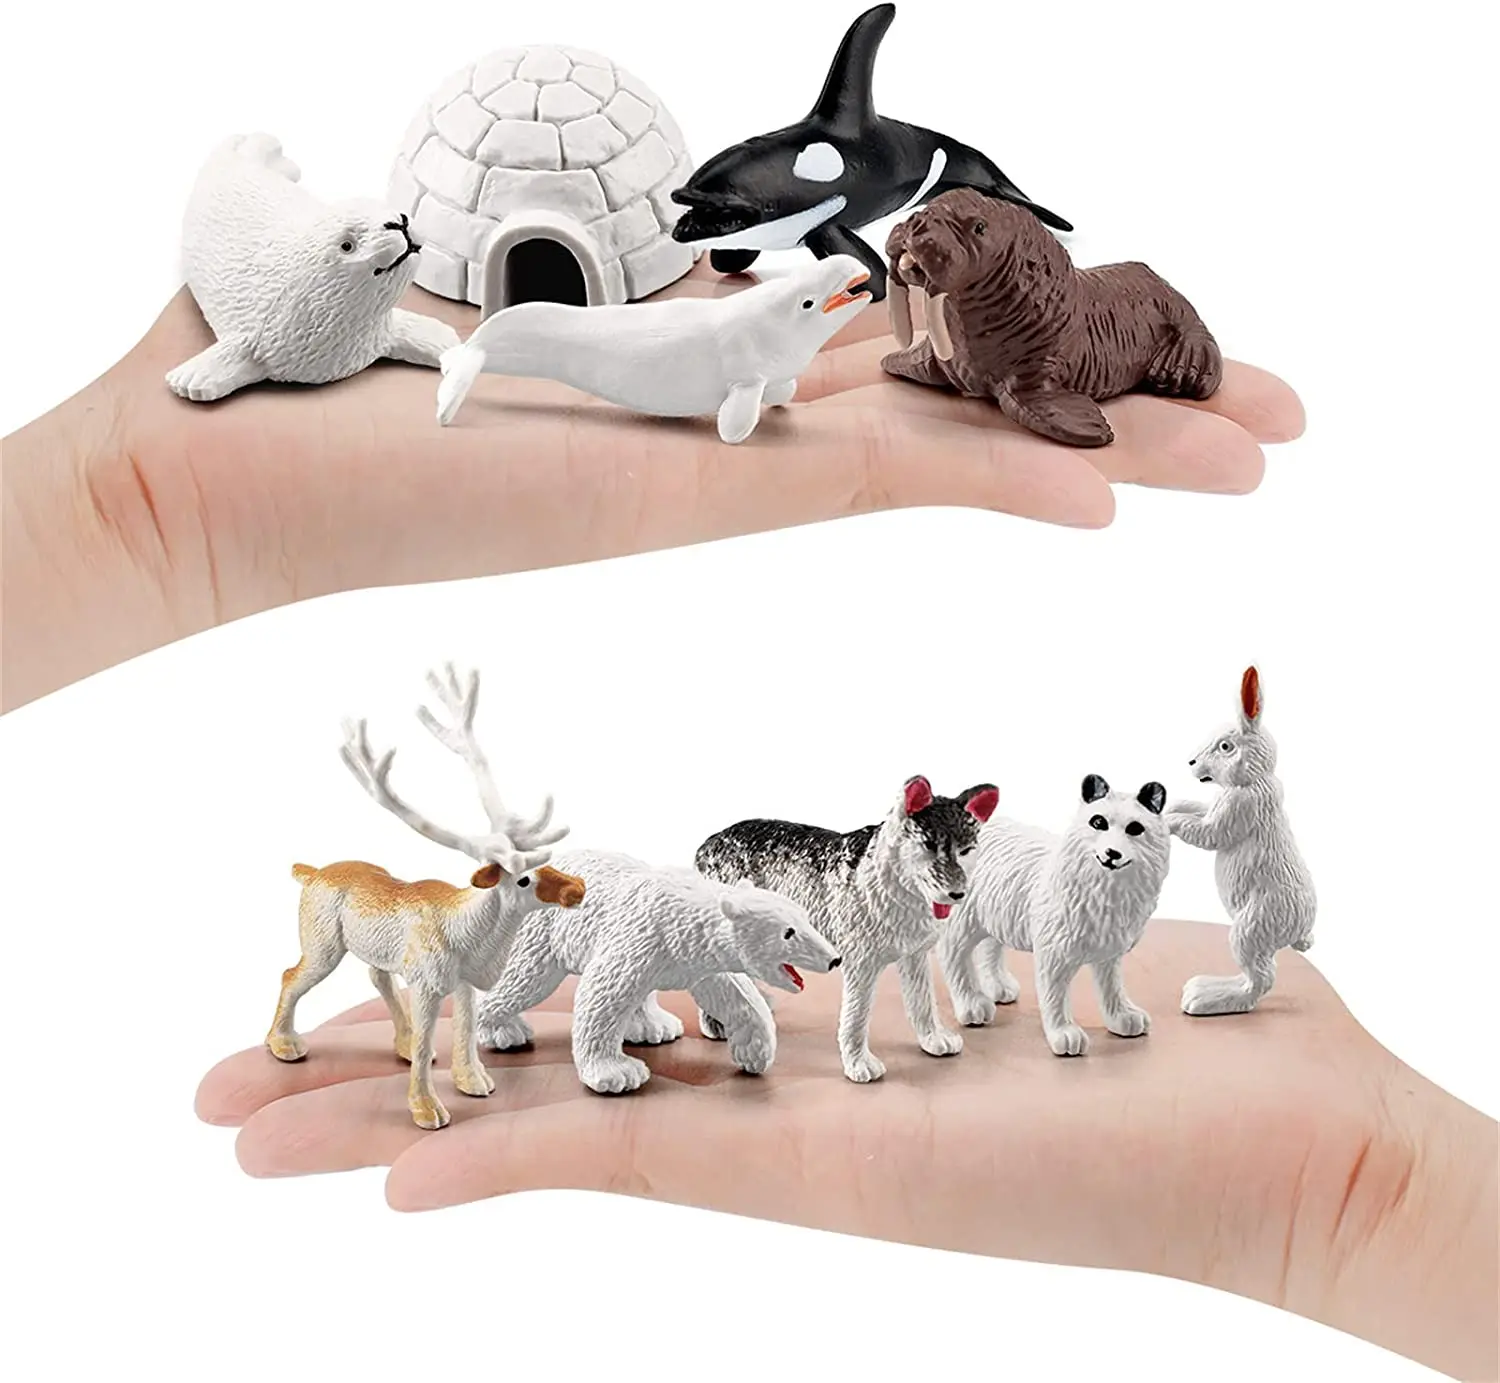 Mini Arctic Animals Toys Set 10pcs Polar Animal Figurines For Toddlers 1-2  Inch Plastic Arctic Tundra Deer Toy Animal - Buy Animals Toys,Plastic Toys,Cheap  Toys For Childrens Plastic Product on 